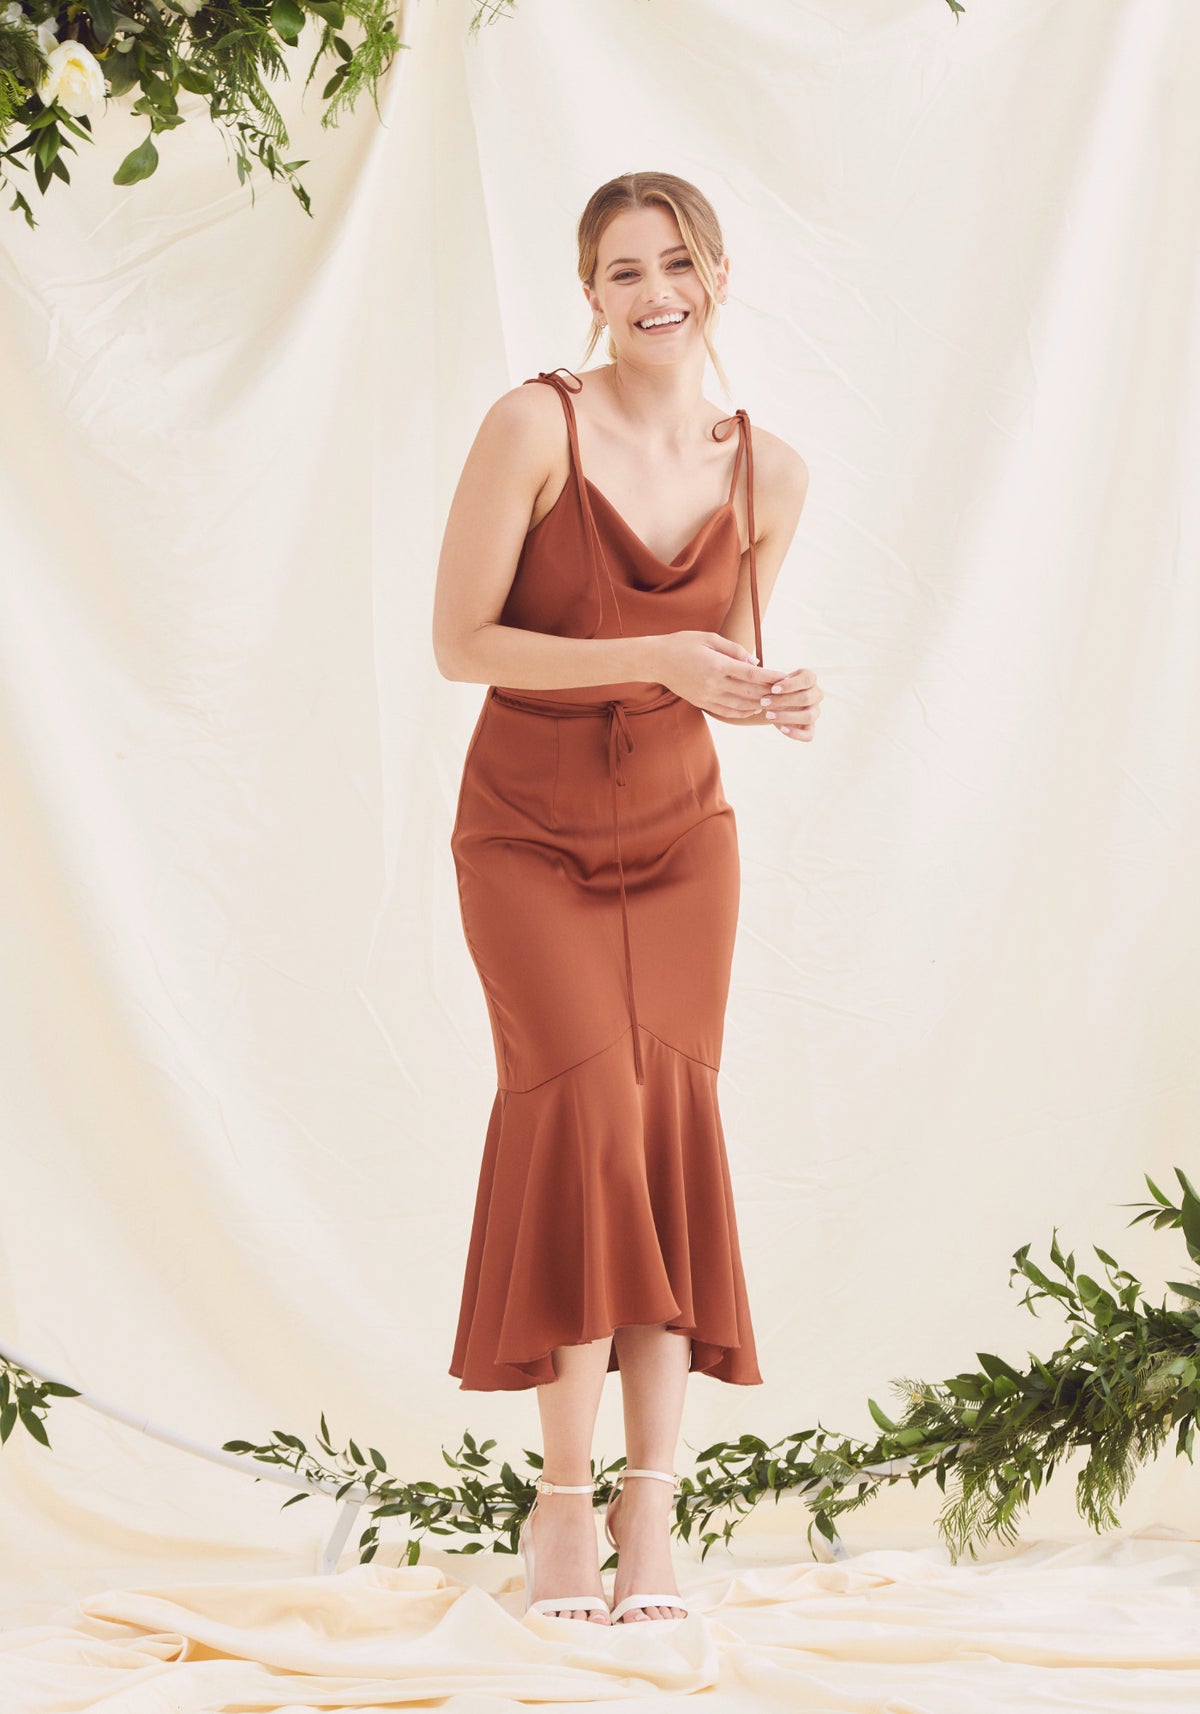 Rust Satin Dress - Rust Bridesmaid Dresses With Cowl Neck and Fishtail Style